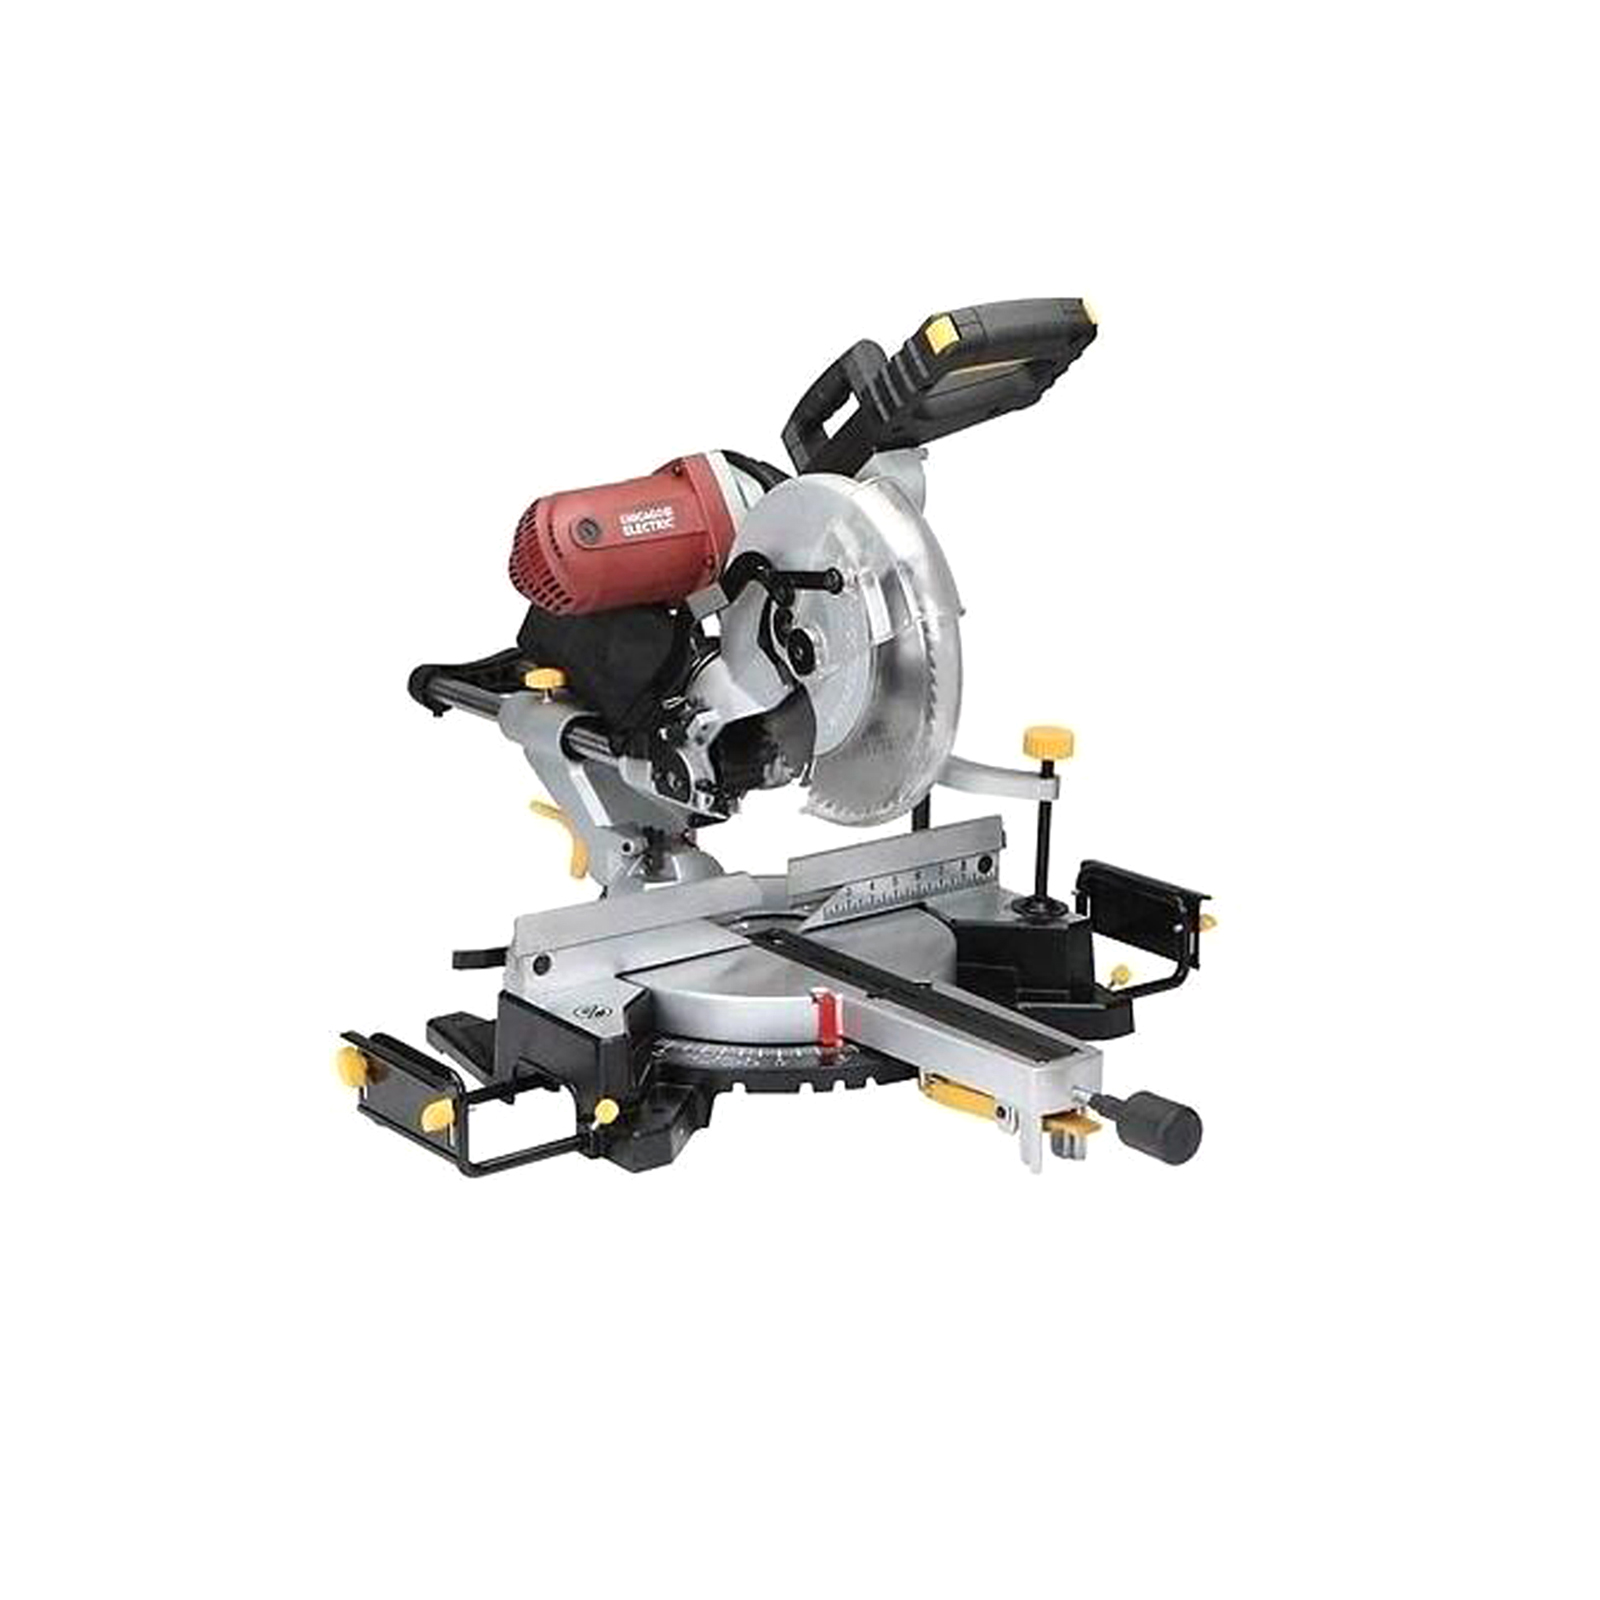 CHICAGO ELECTRIC 15A 12" Double-Bevel Sliding Compound Miter Saw with Laser Guide